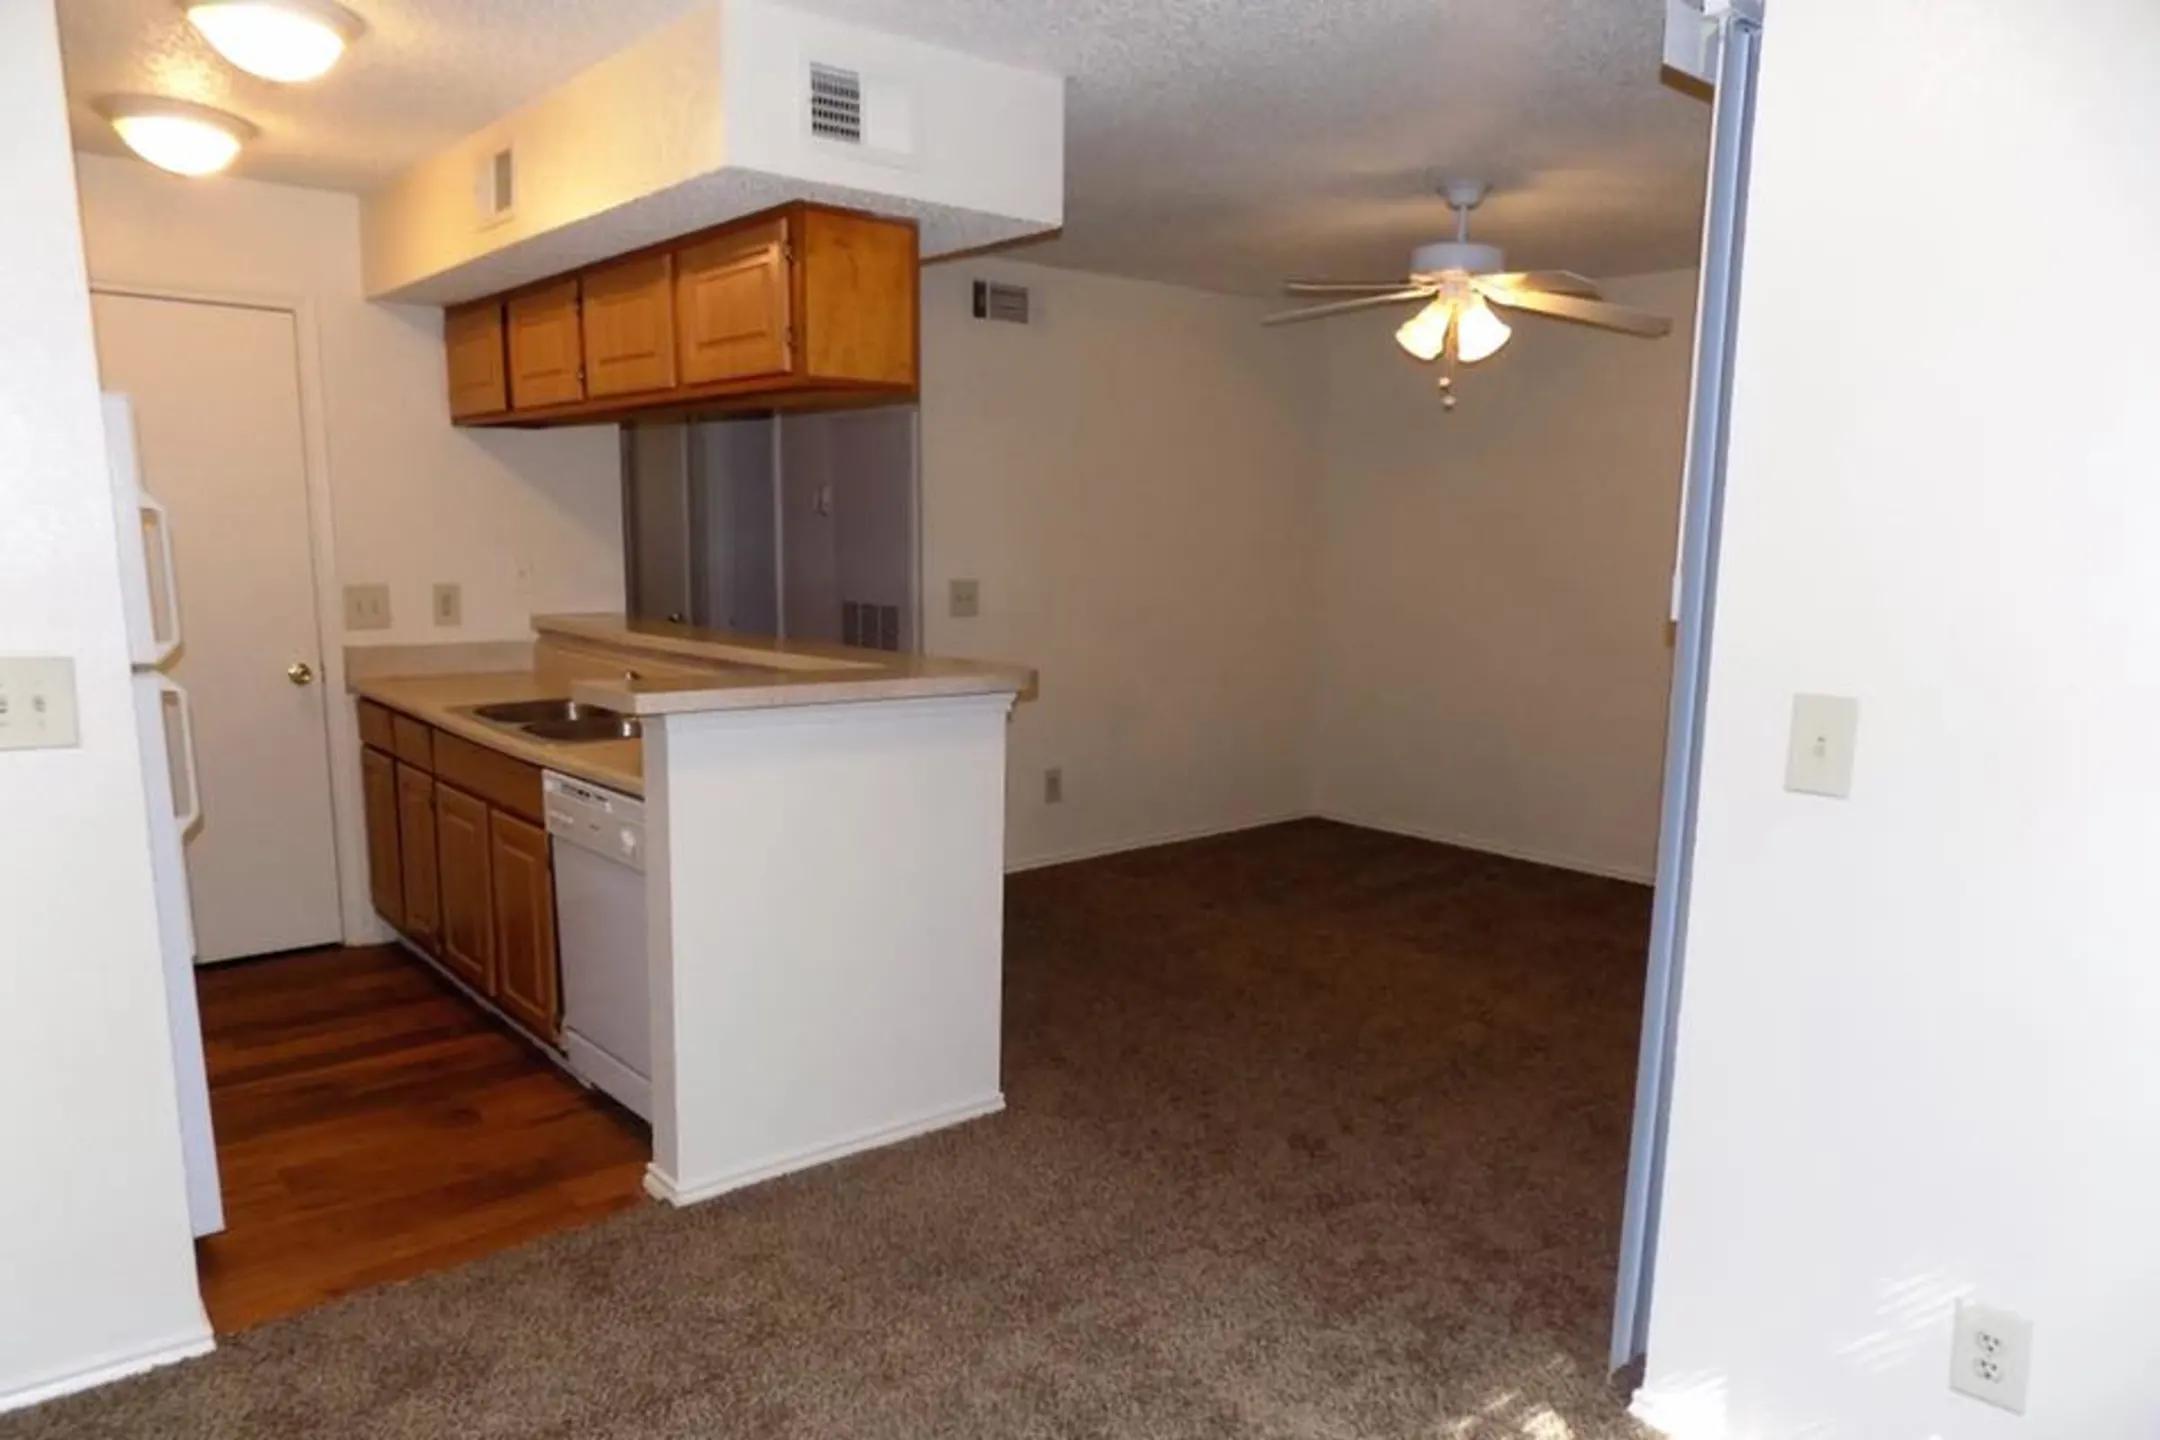 Kitchen - Colony Apartments - Woodway, TX